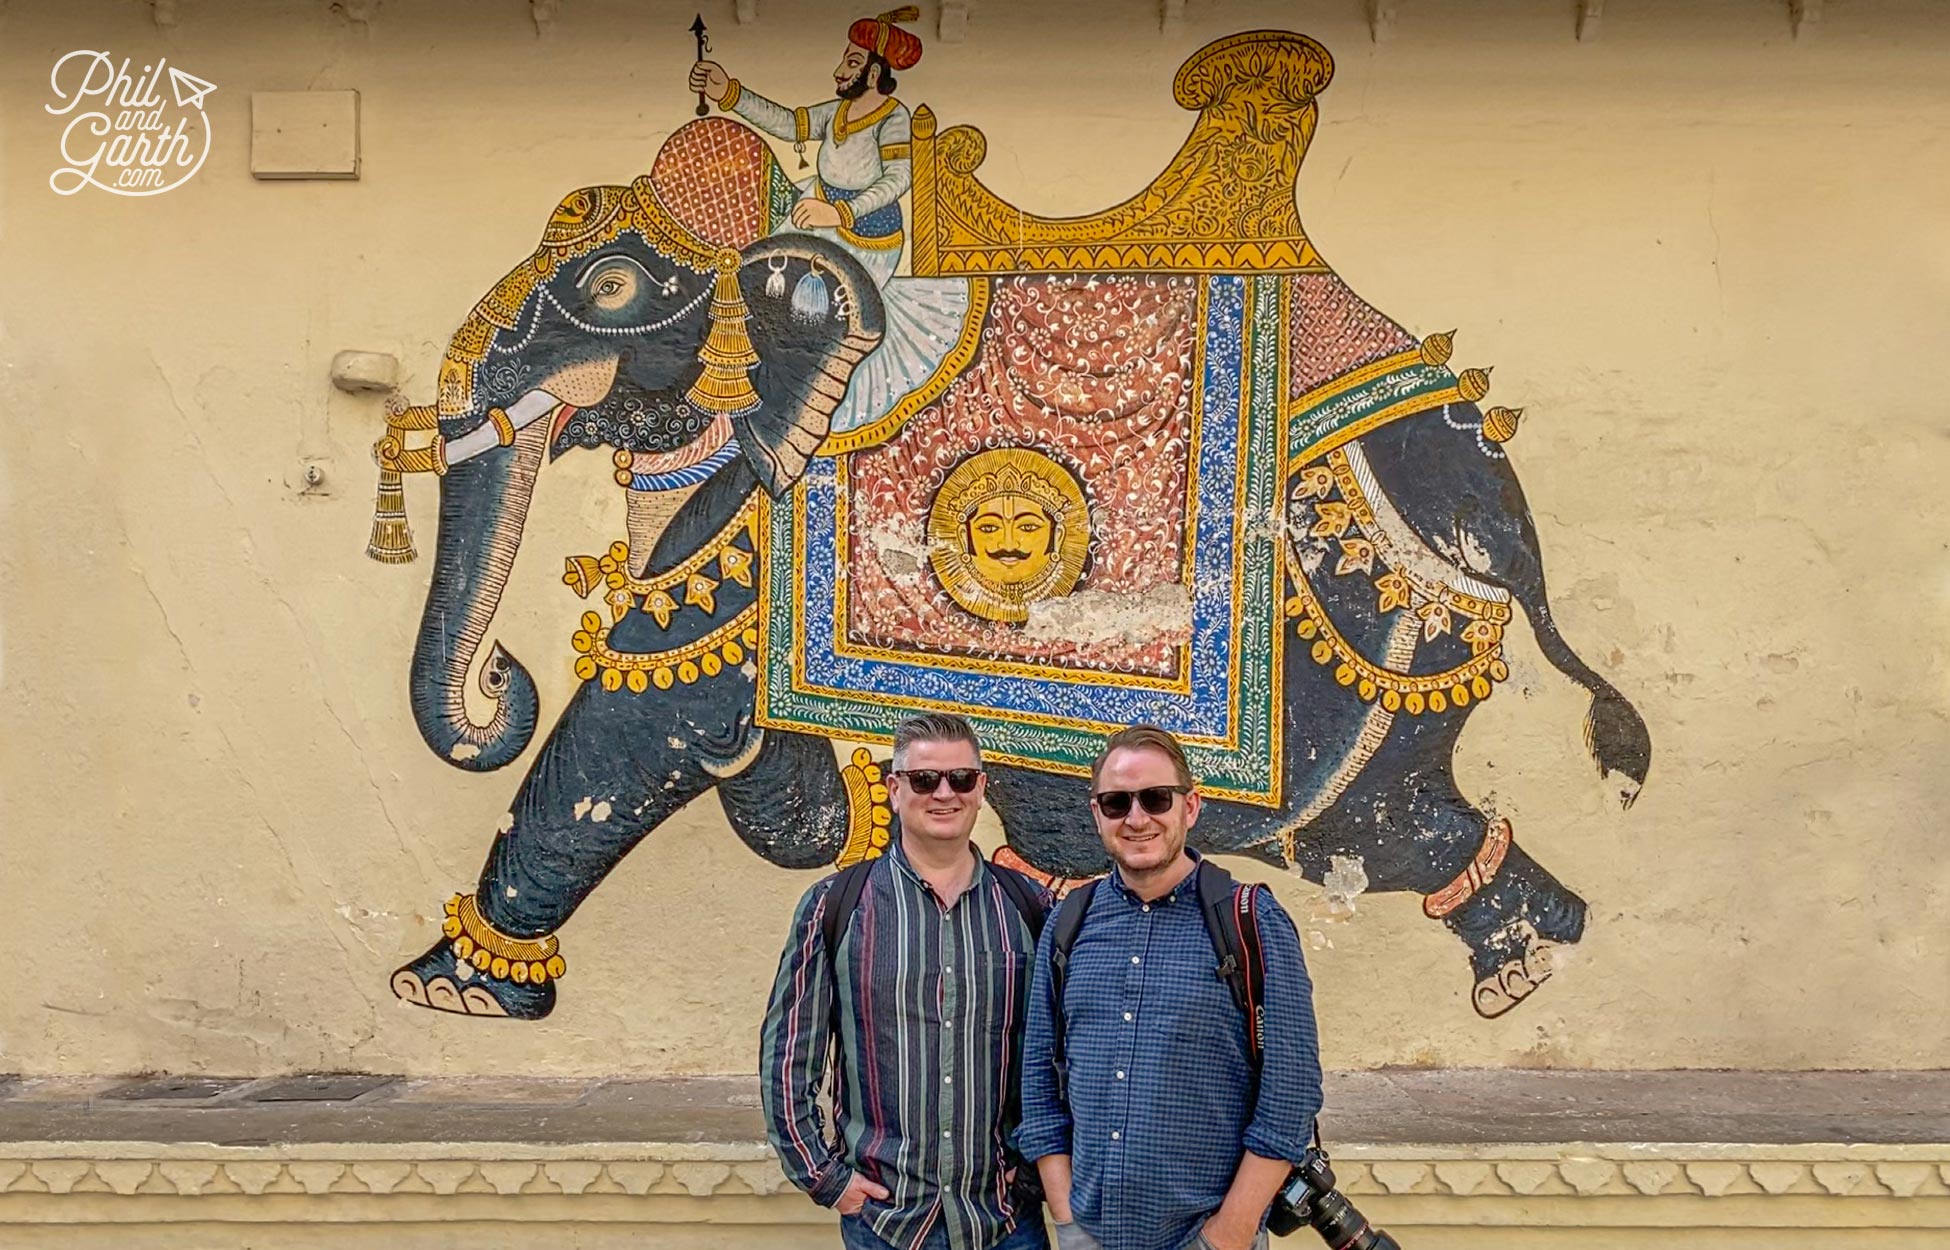 Phil and Garth's Top 5 Udaipur Travel Tips